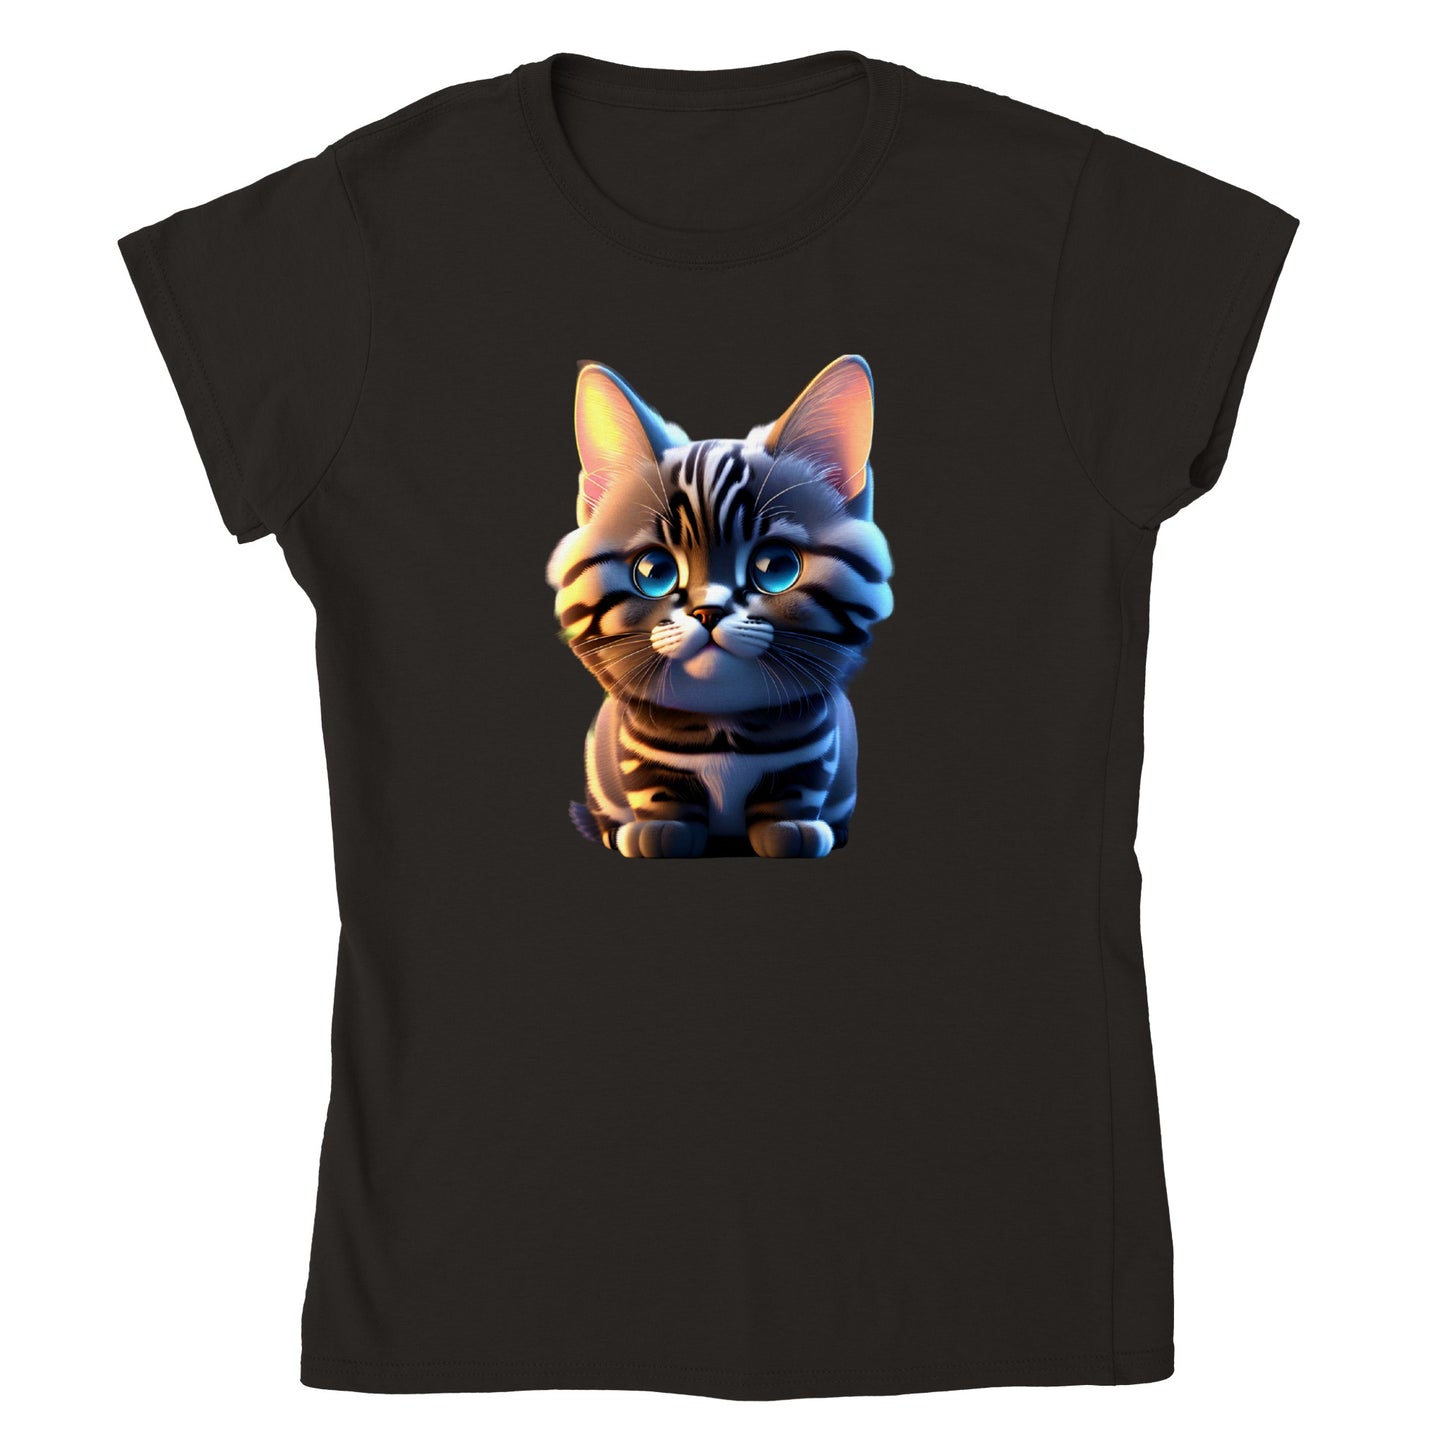 Adorable, Cool, Cute Cats and Kittens Toy - Classic Women’s Crewneck T-Shirt 14